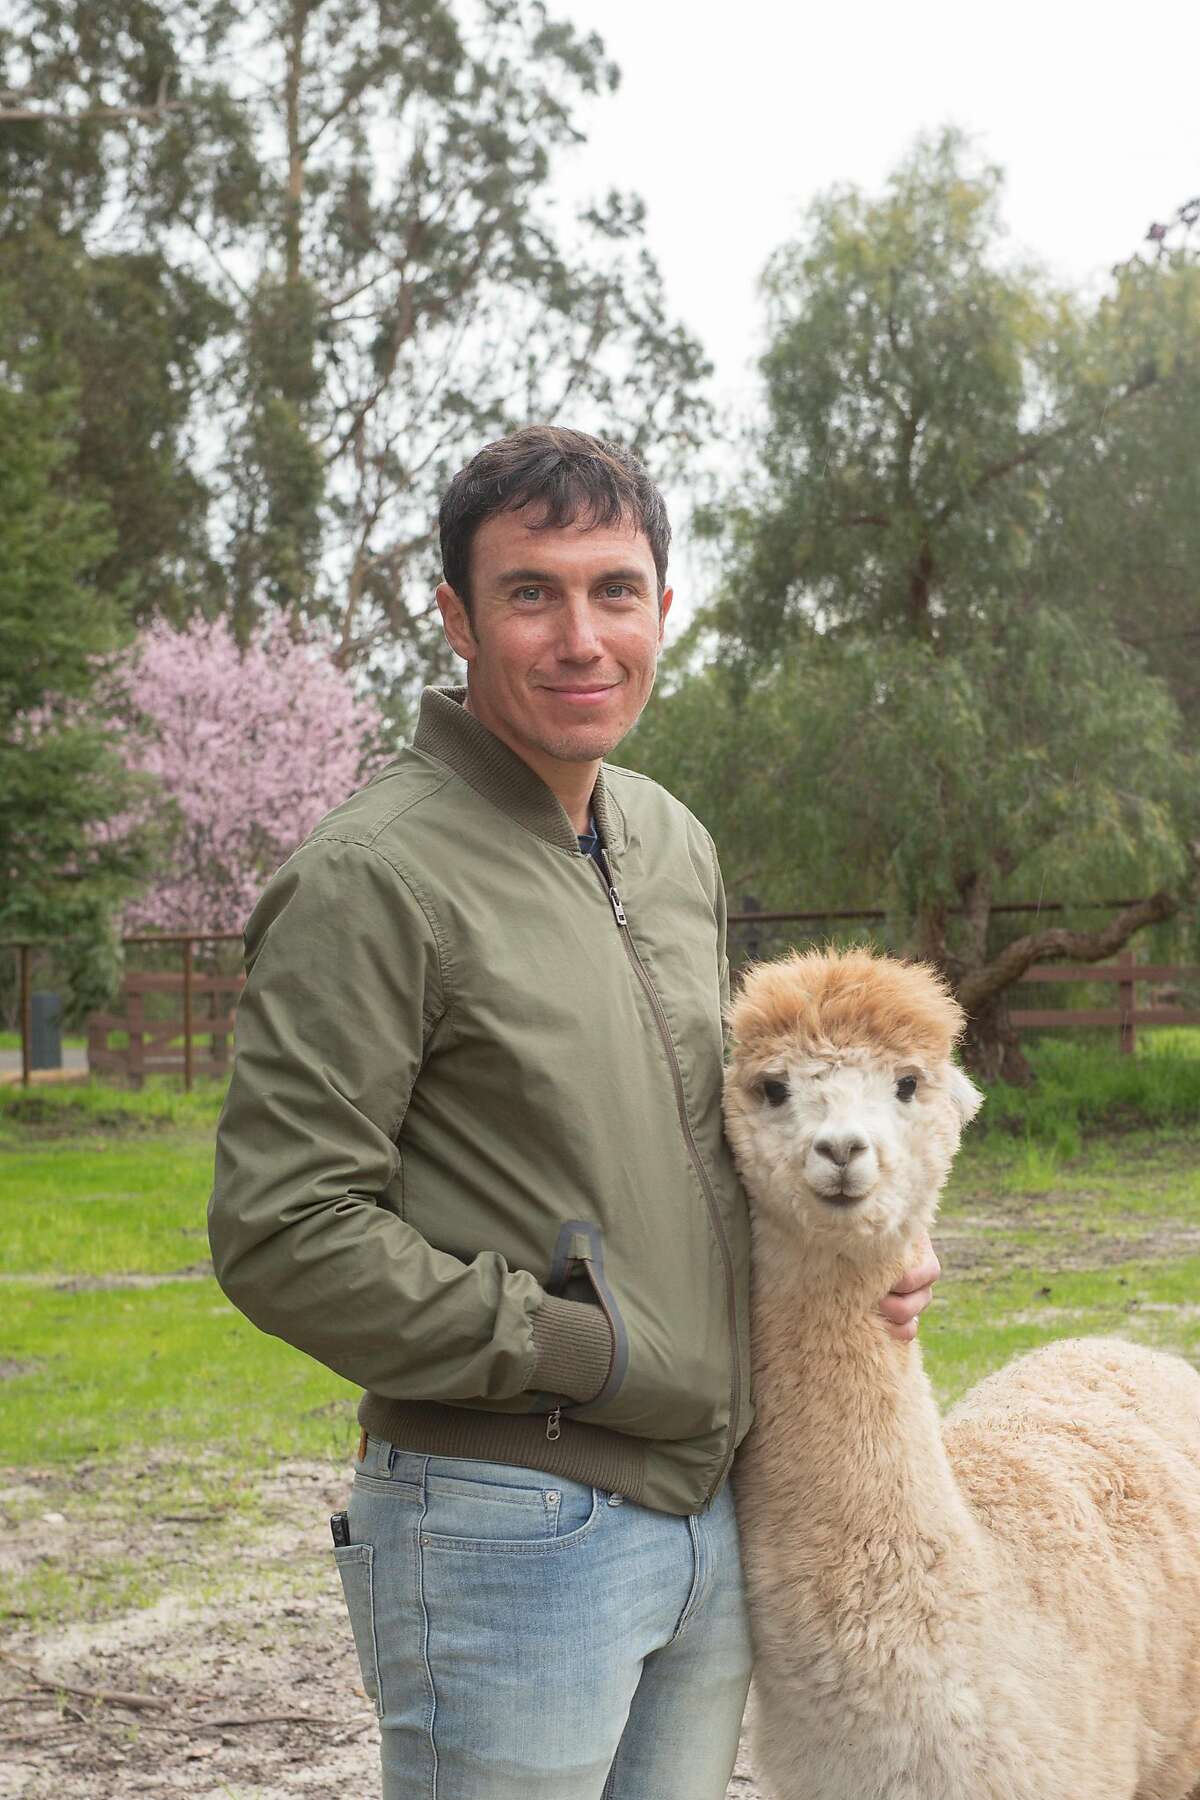 Photographer Chris Burkard with one of his two pet alpacas at his home in Arroyo Grande, Calif.